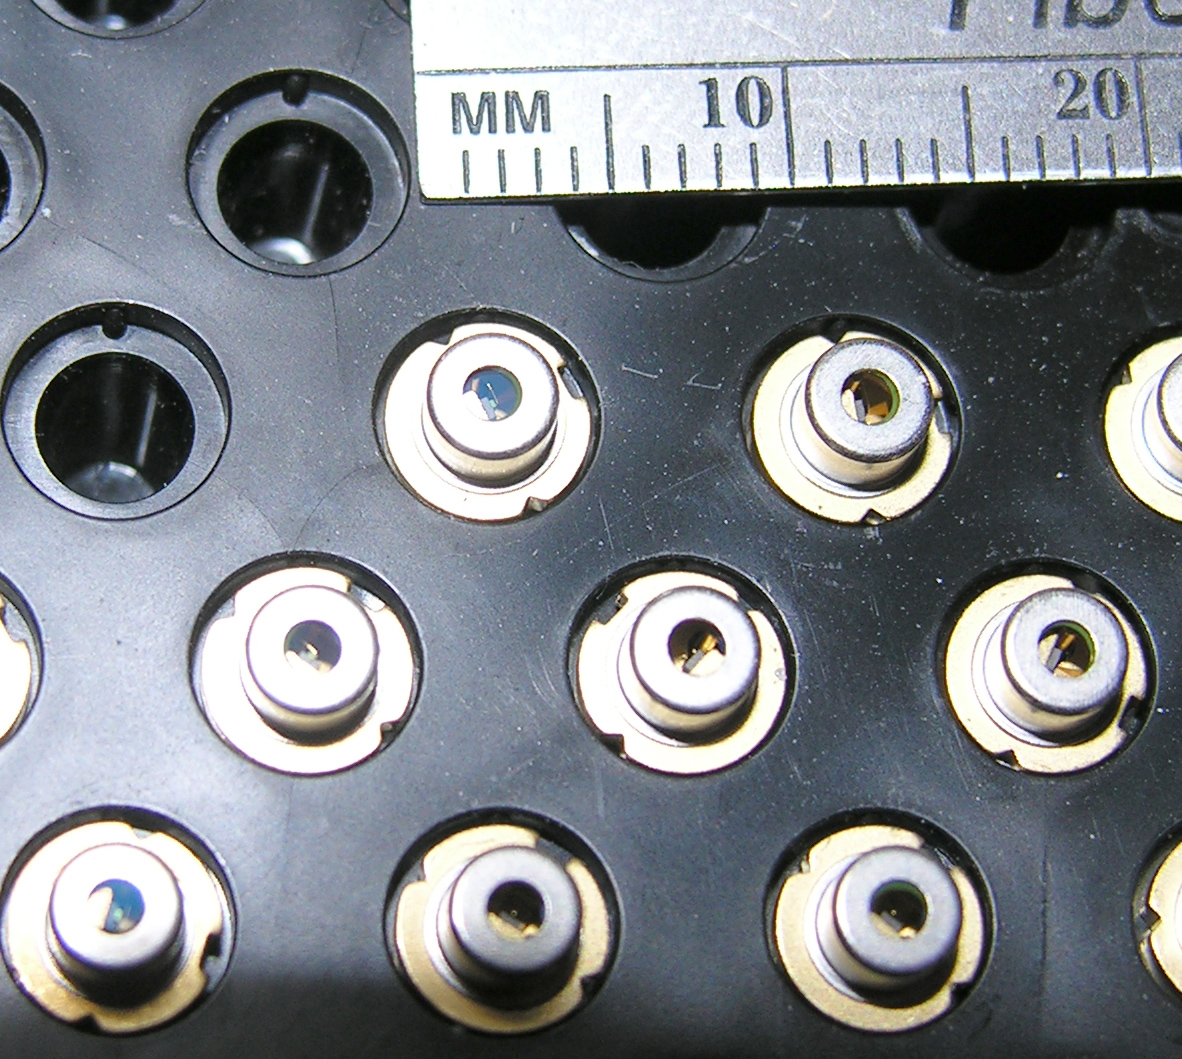 photo of laser
                                  diodes.